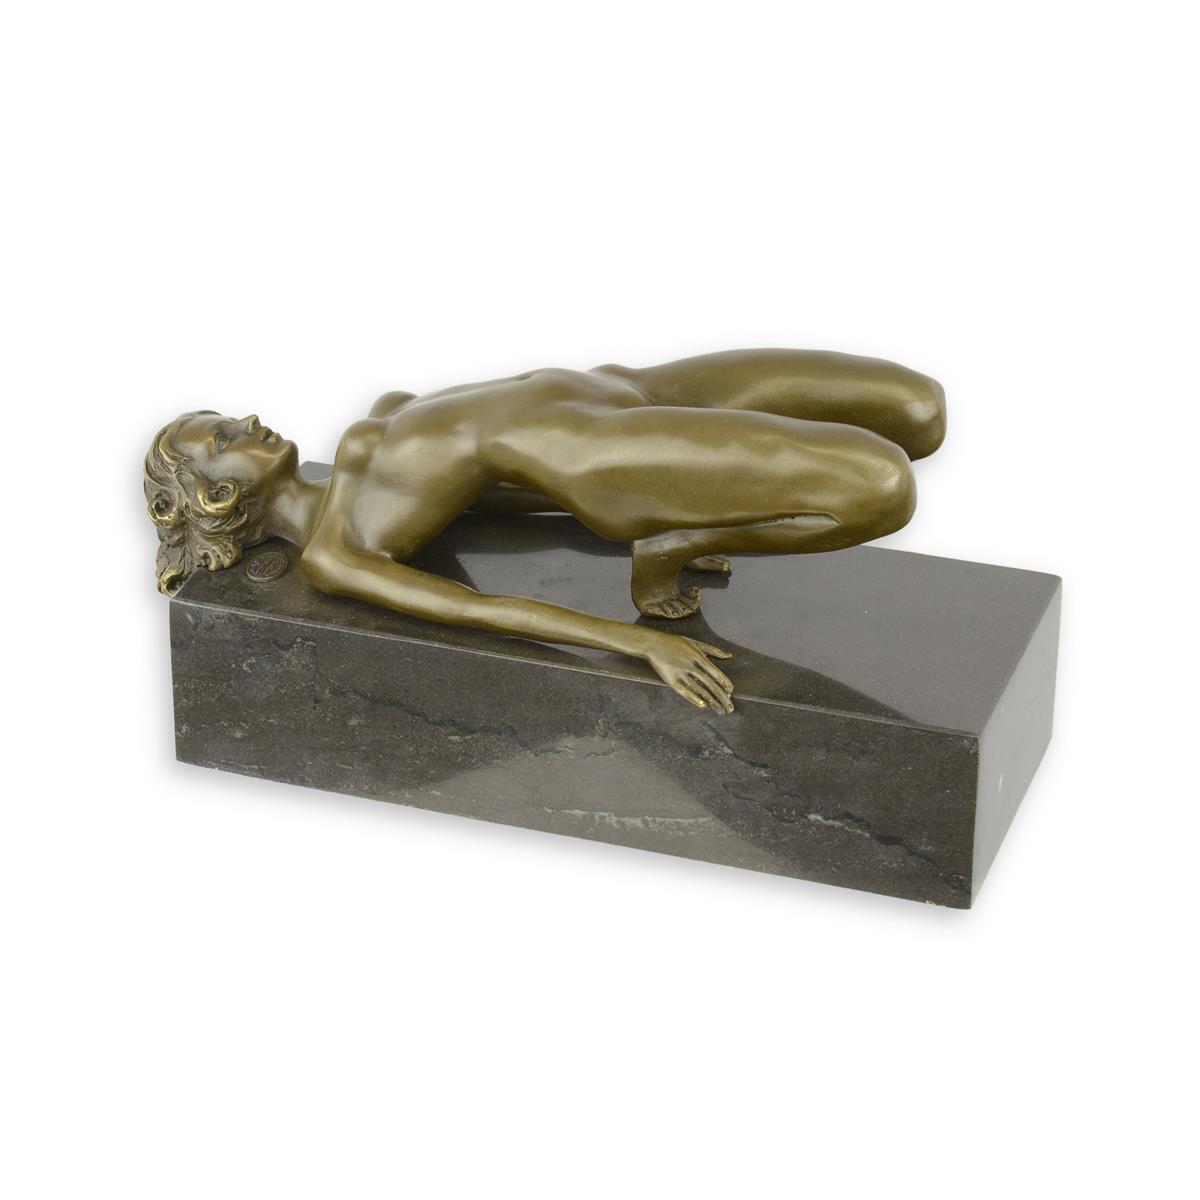 A BRONZE SCULPTURE OF A NAKED WOMAN IN A DIFFICULT POSE